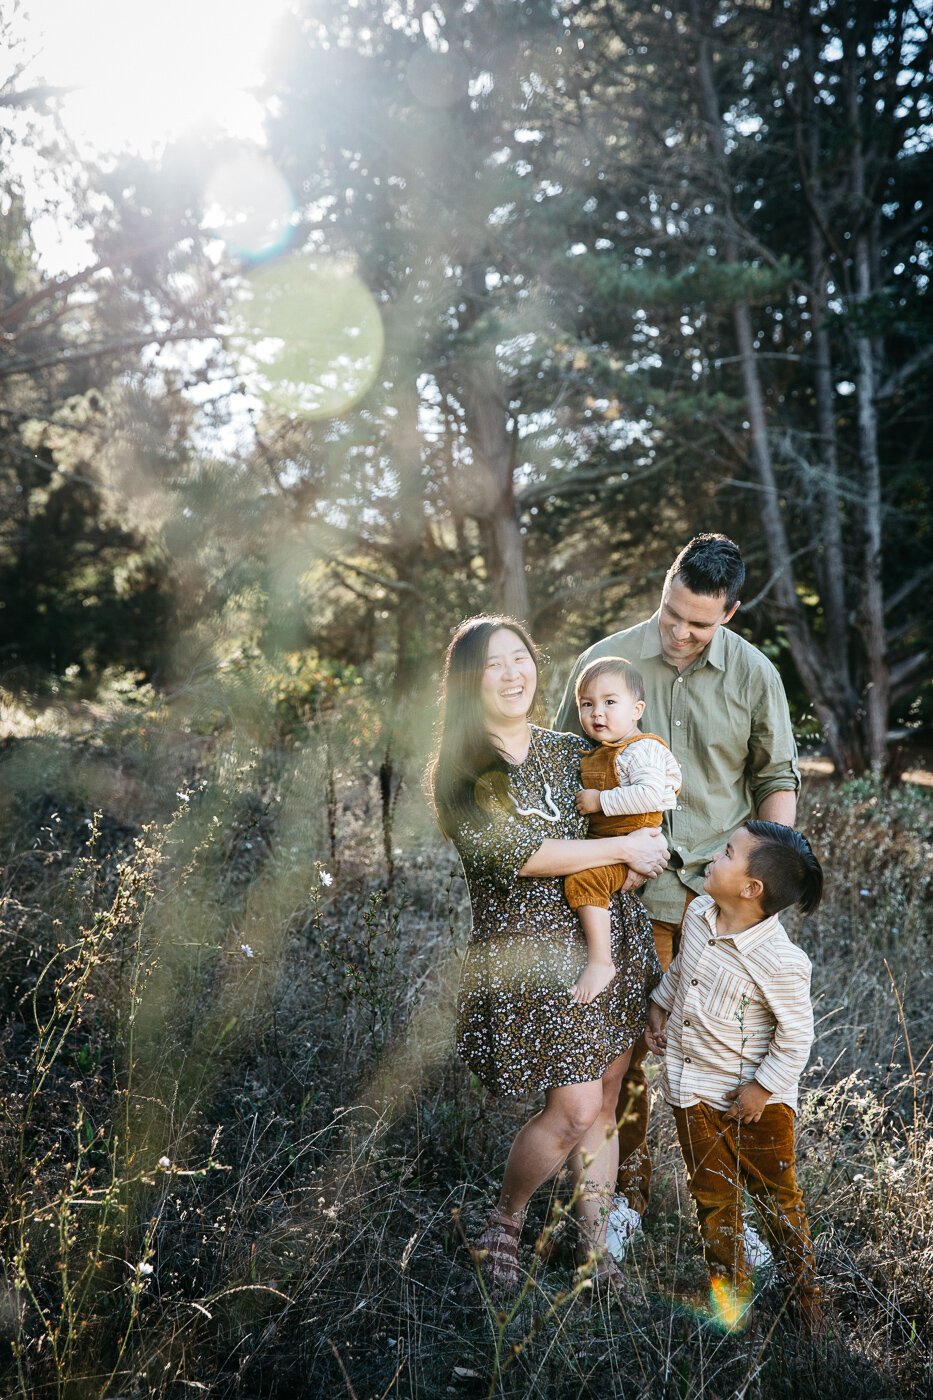 family photography session at McLaren Park in San Francico by Al